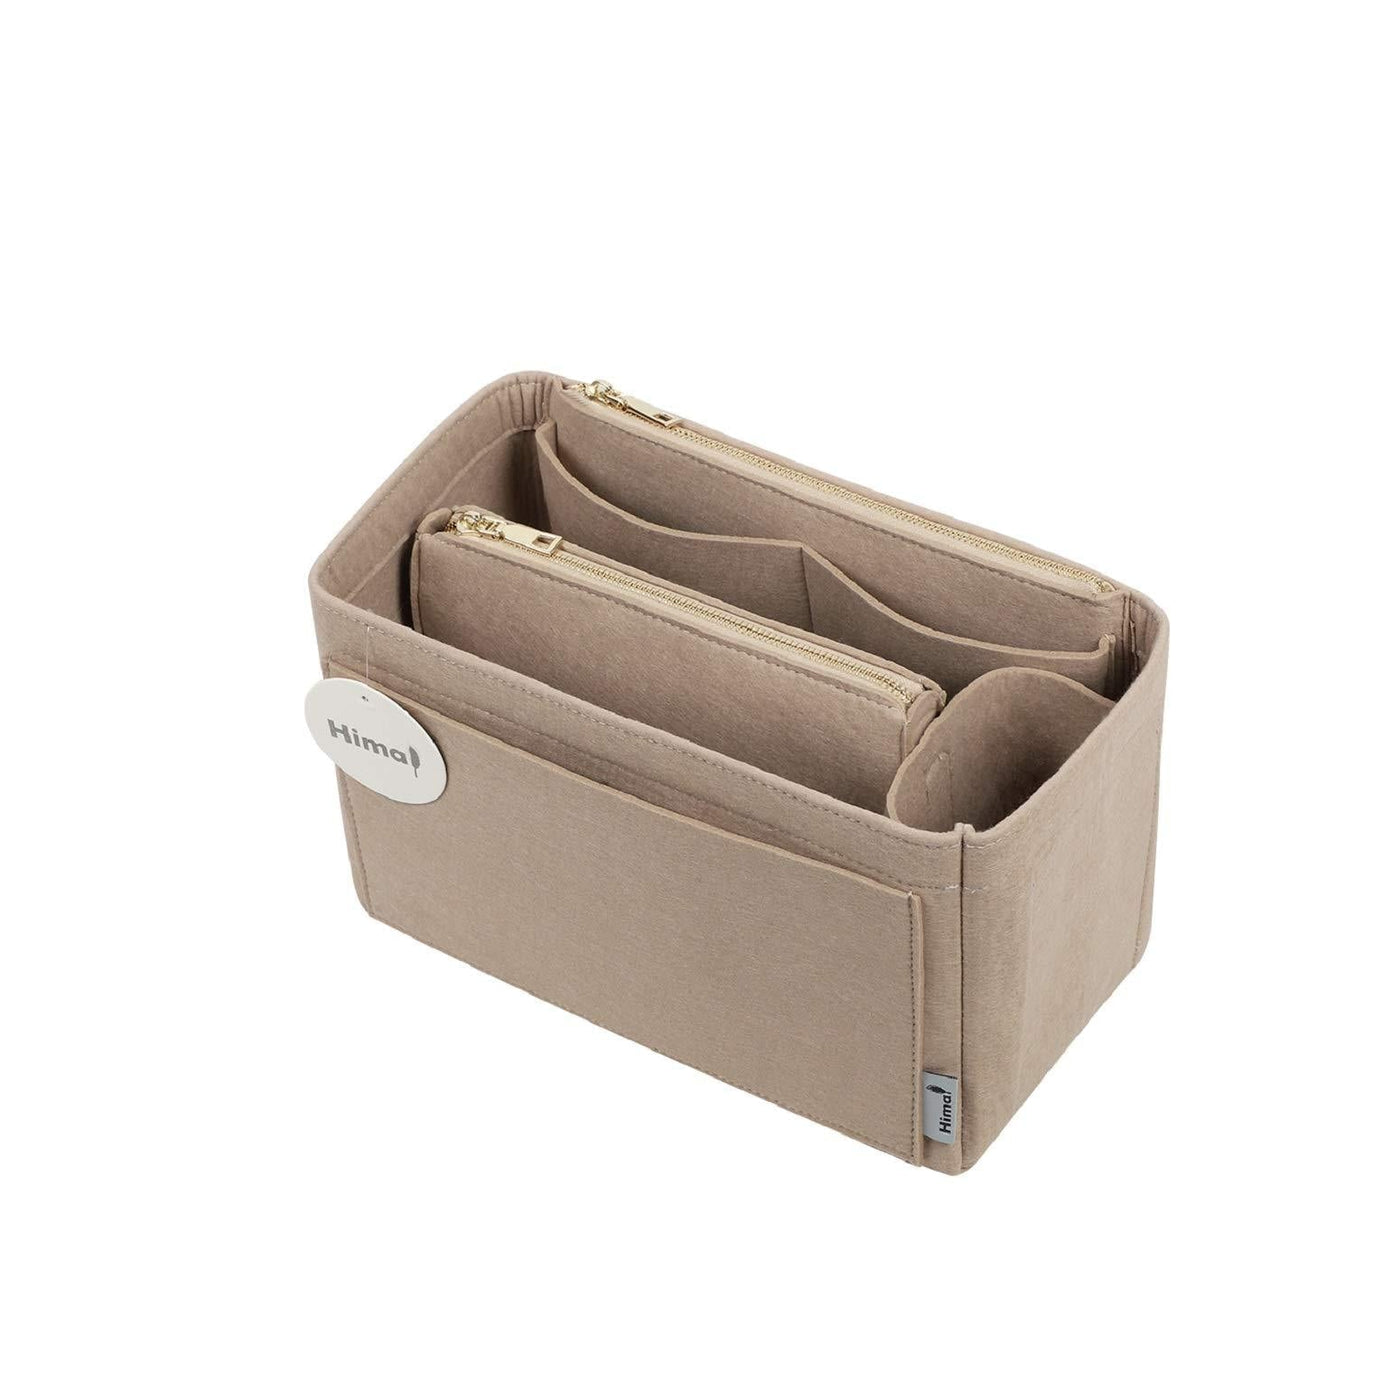 Handbag Organizer with Detachable Zipper Top Style for Graceful PM